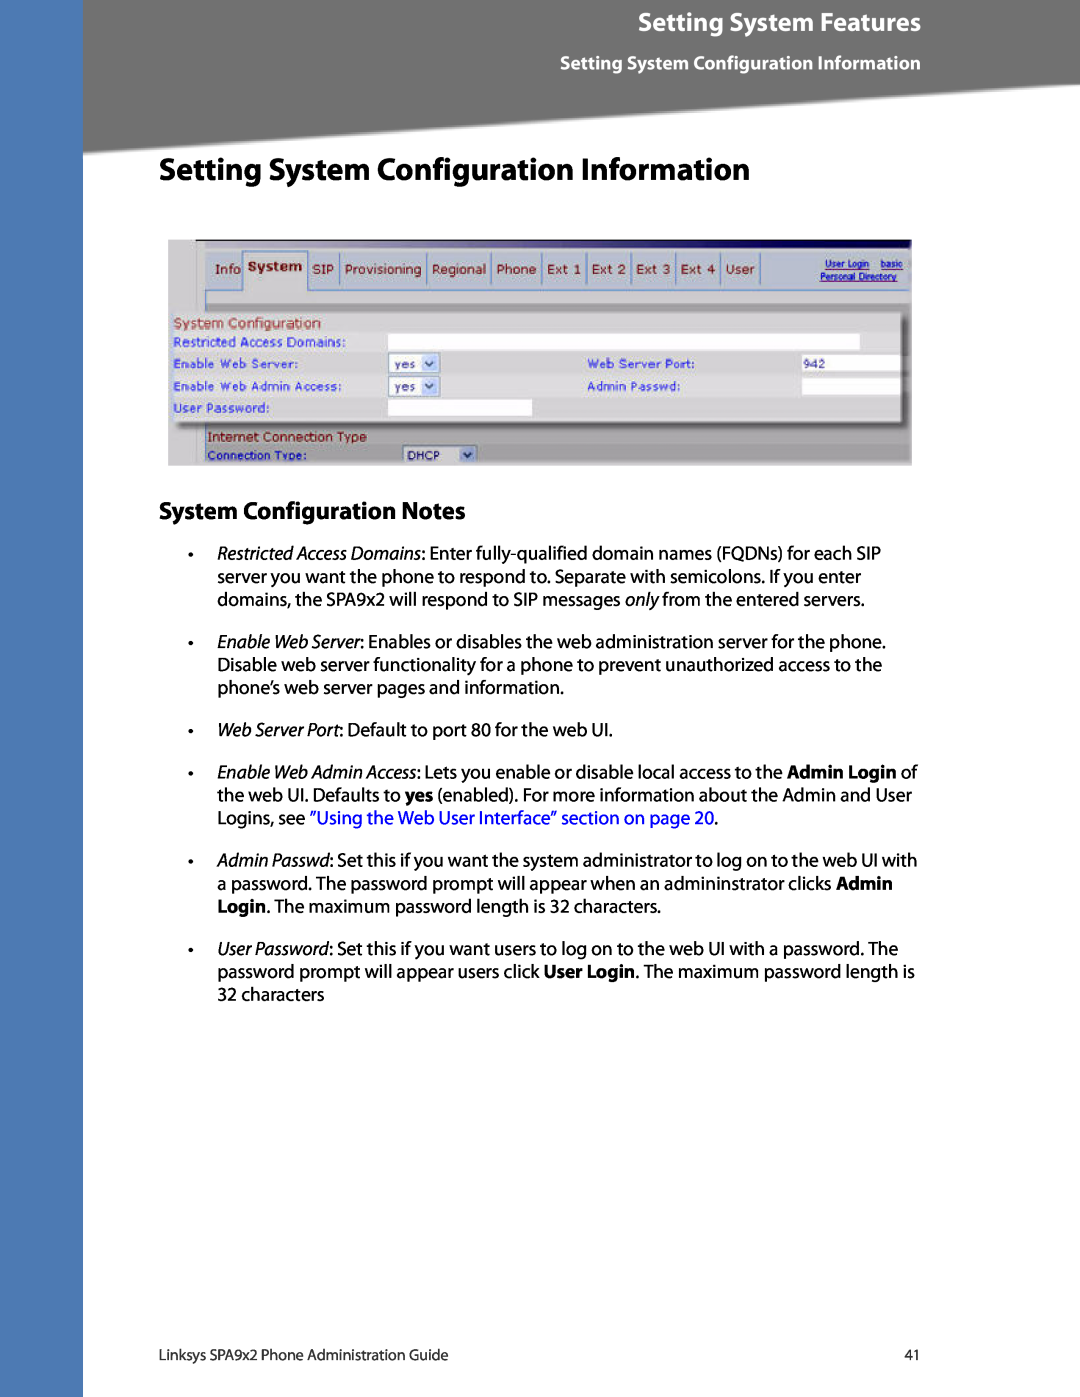 Linksys SPA962, SPA942 manual Setting System Configuration Information, System Configuration Notes, Setting System Features 